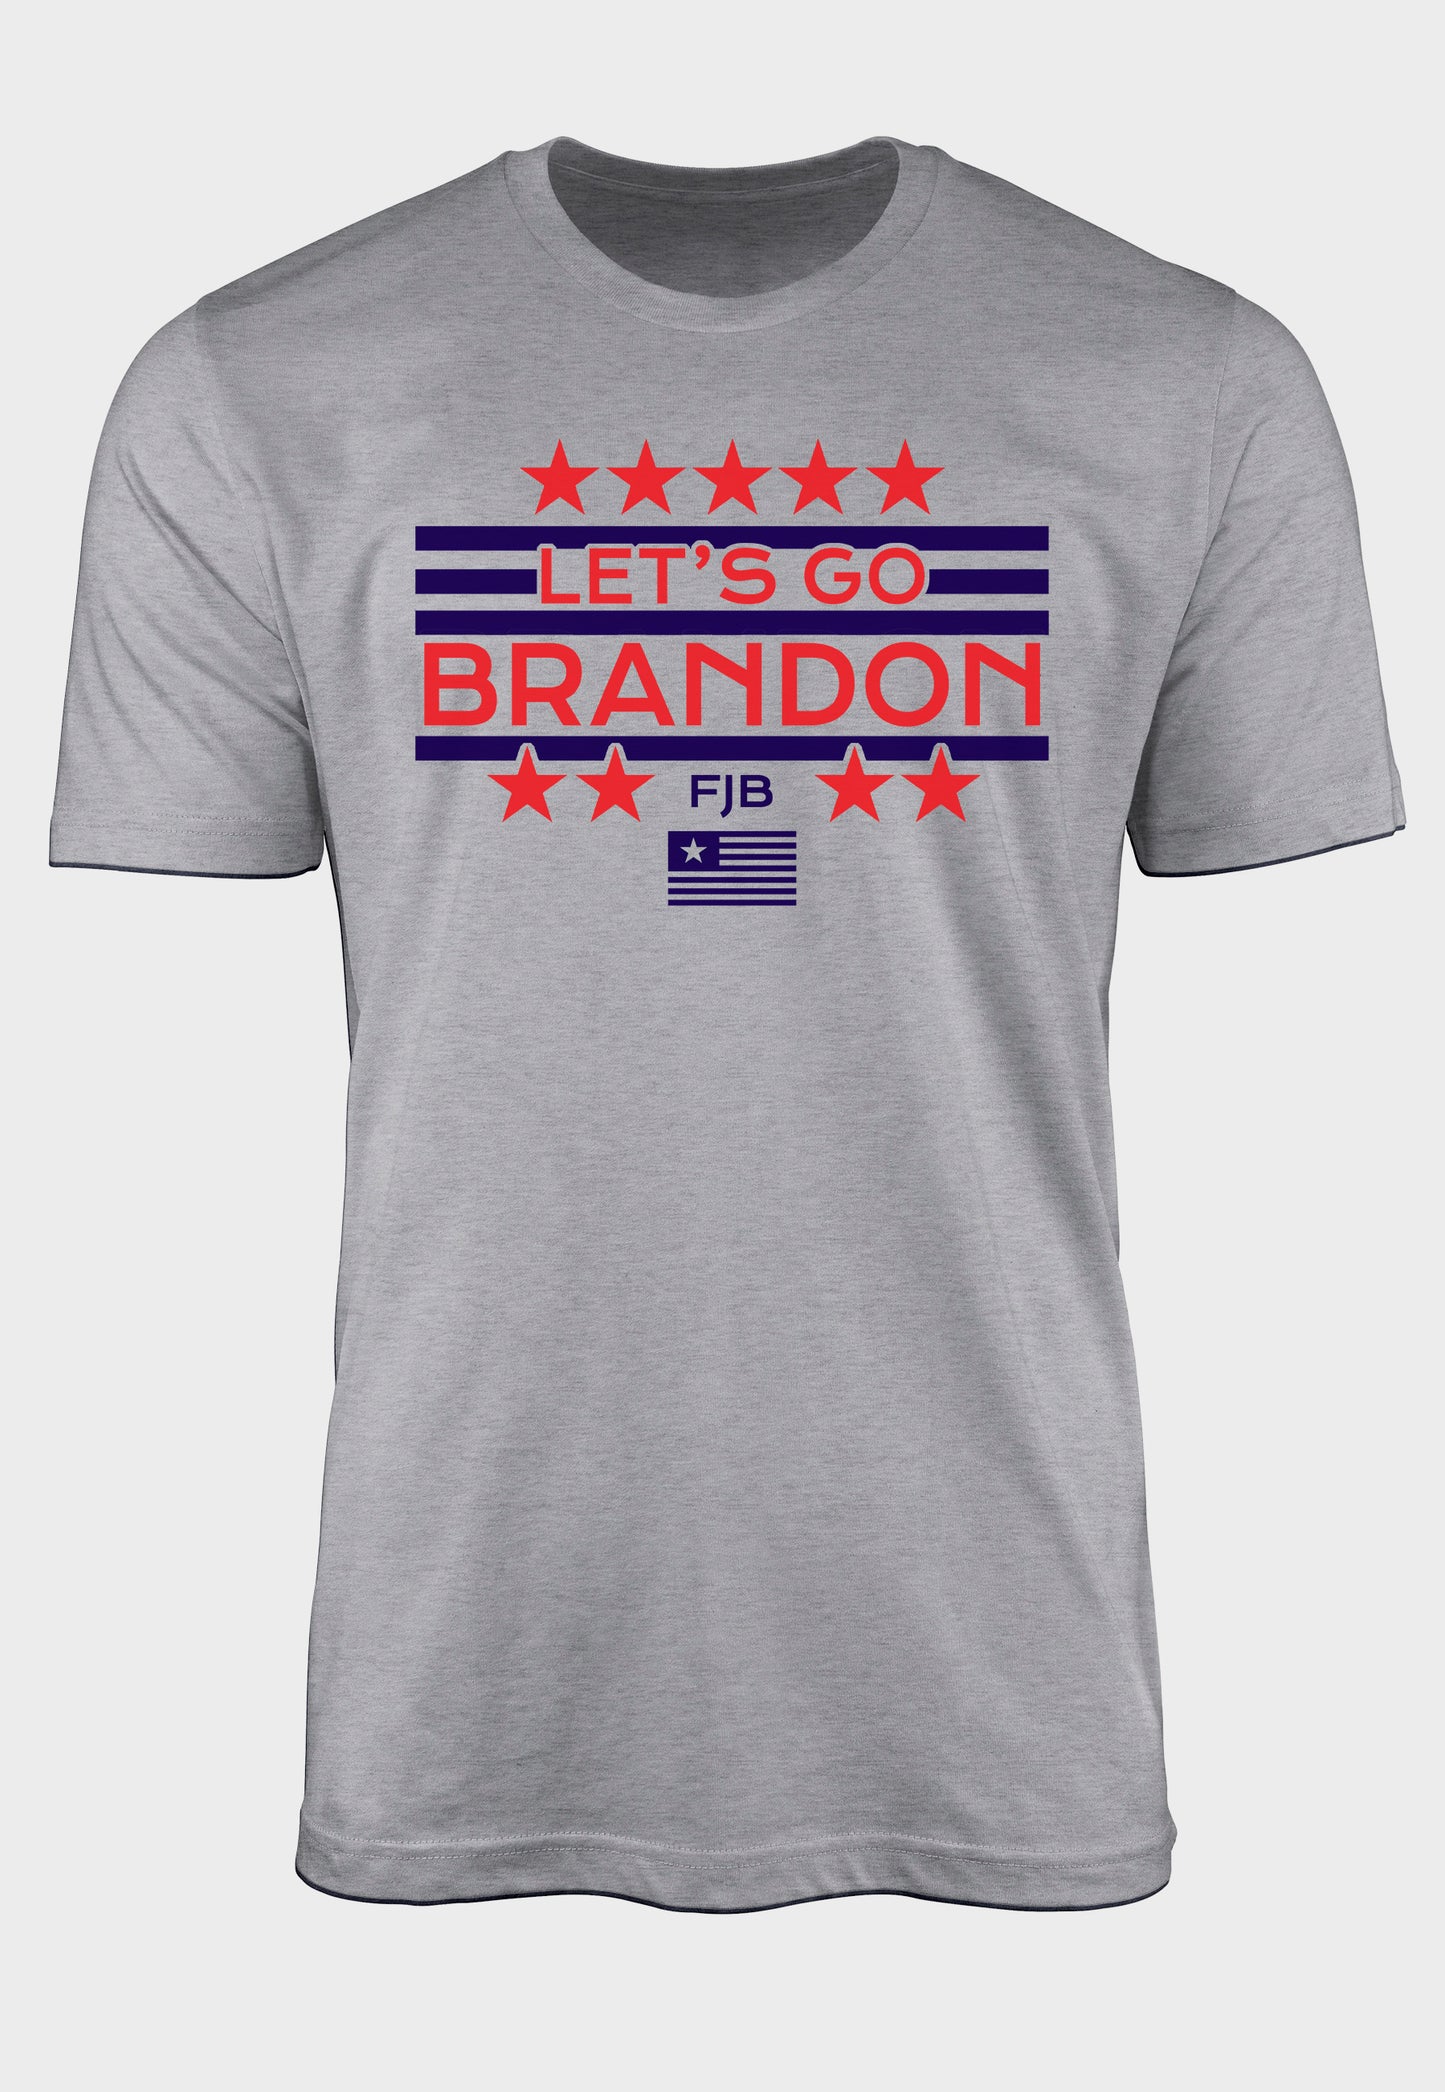 Let's go Brandon t-shirt with FJB on it